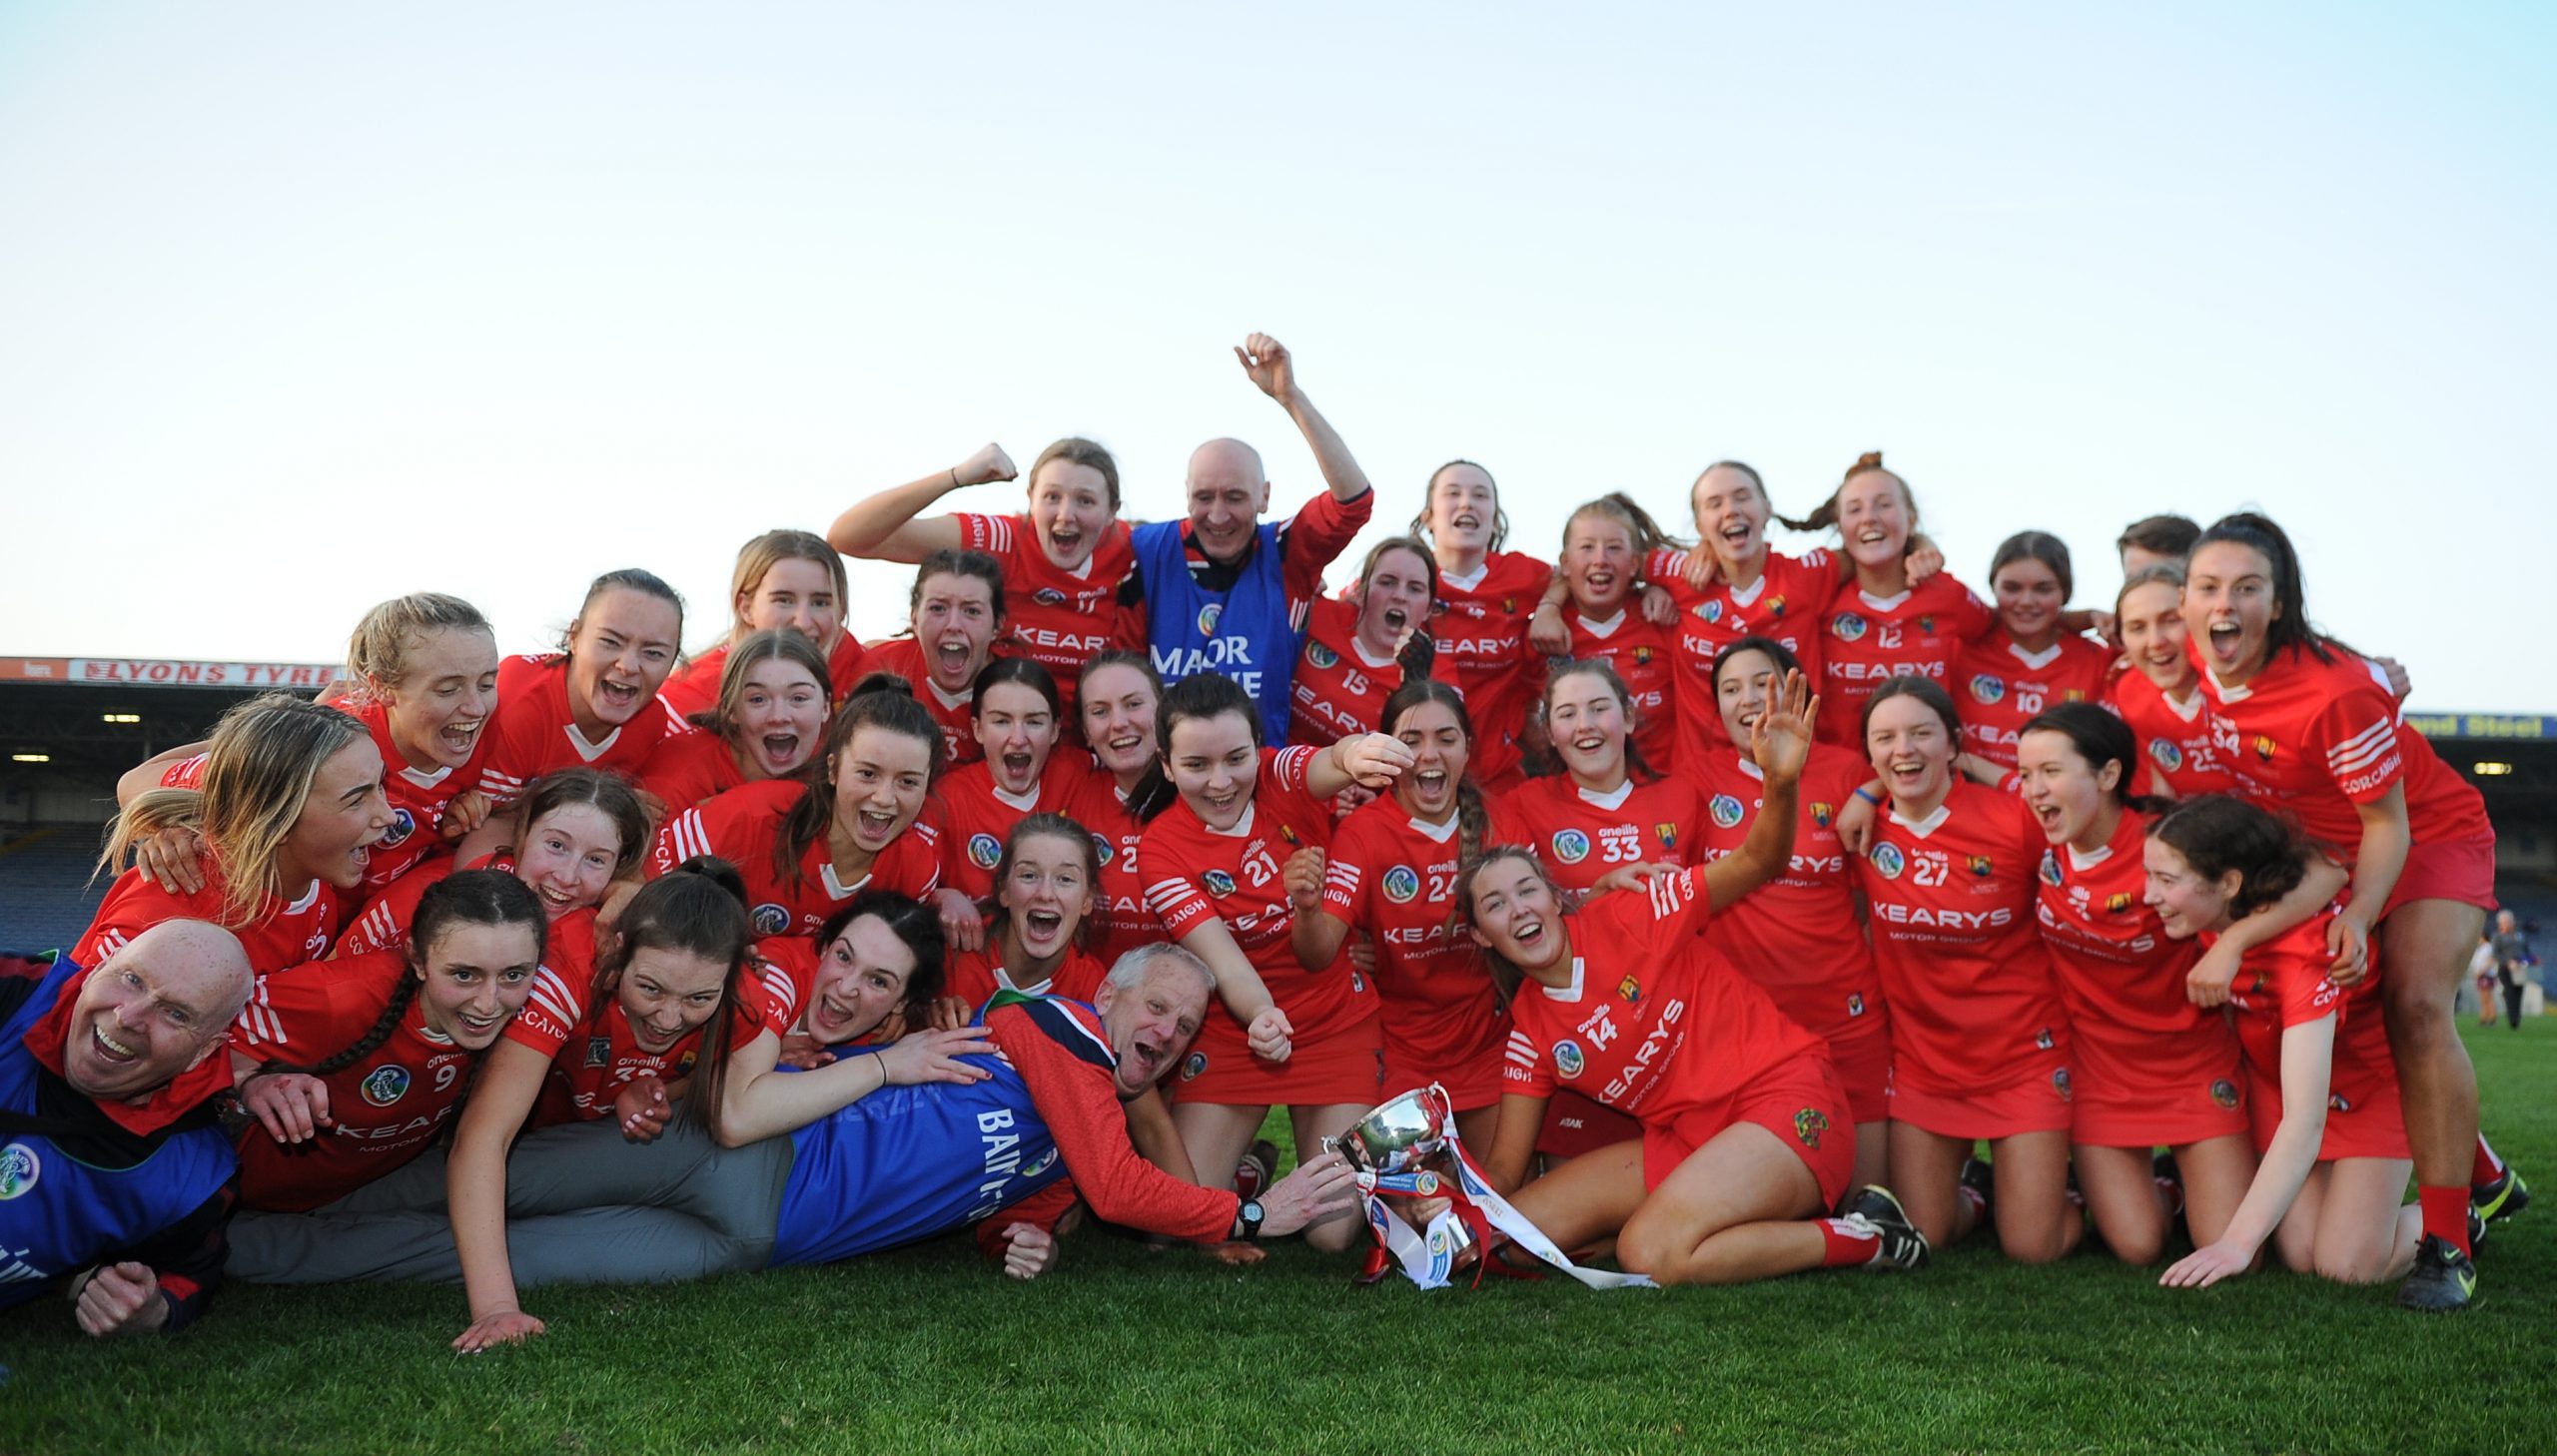 REPORT: Cork hold off Galway to claim minor A title